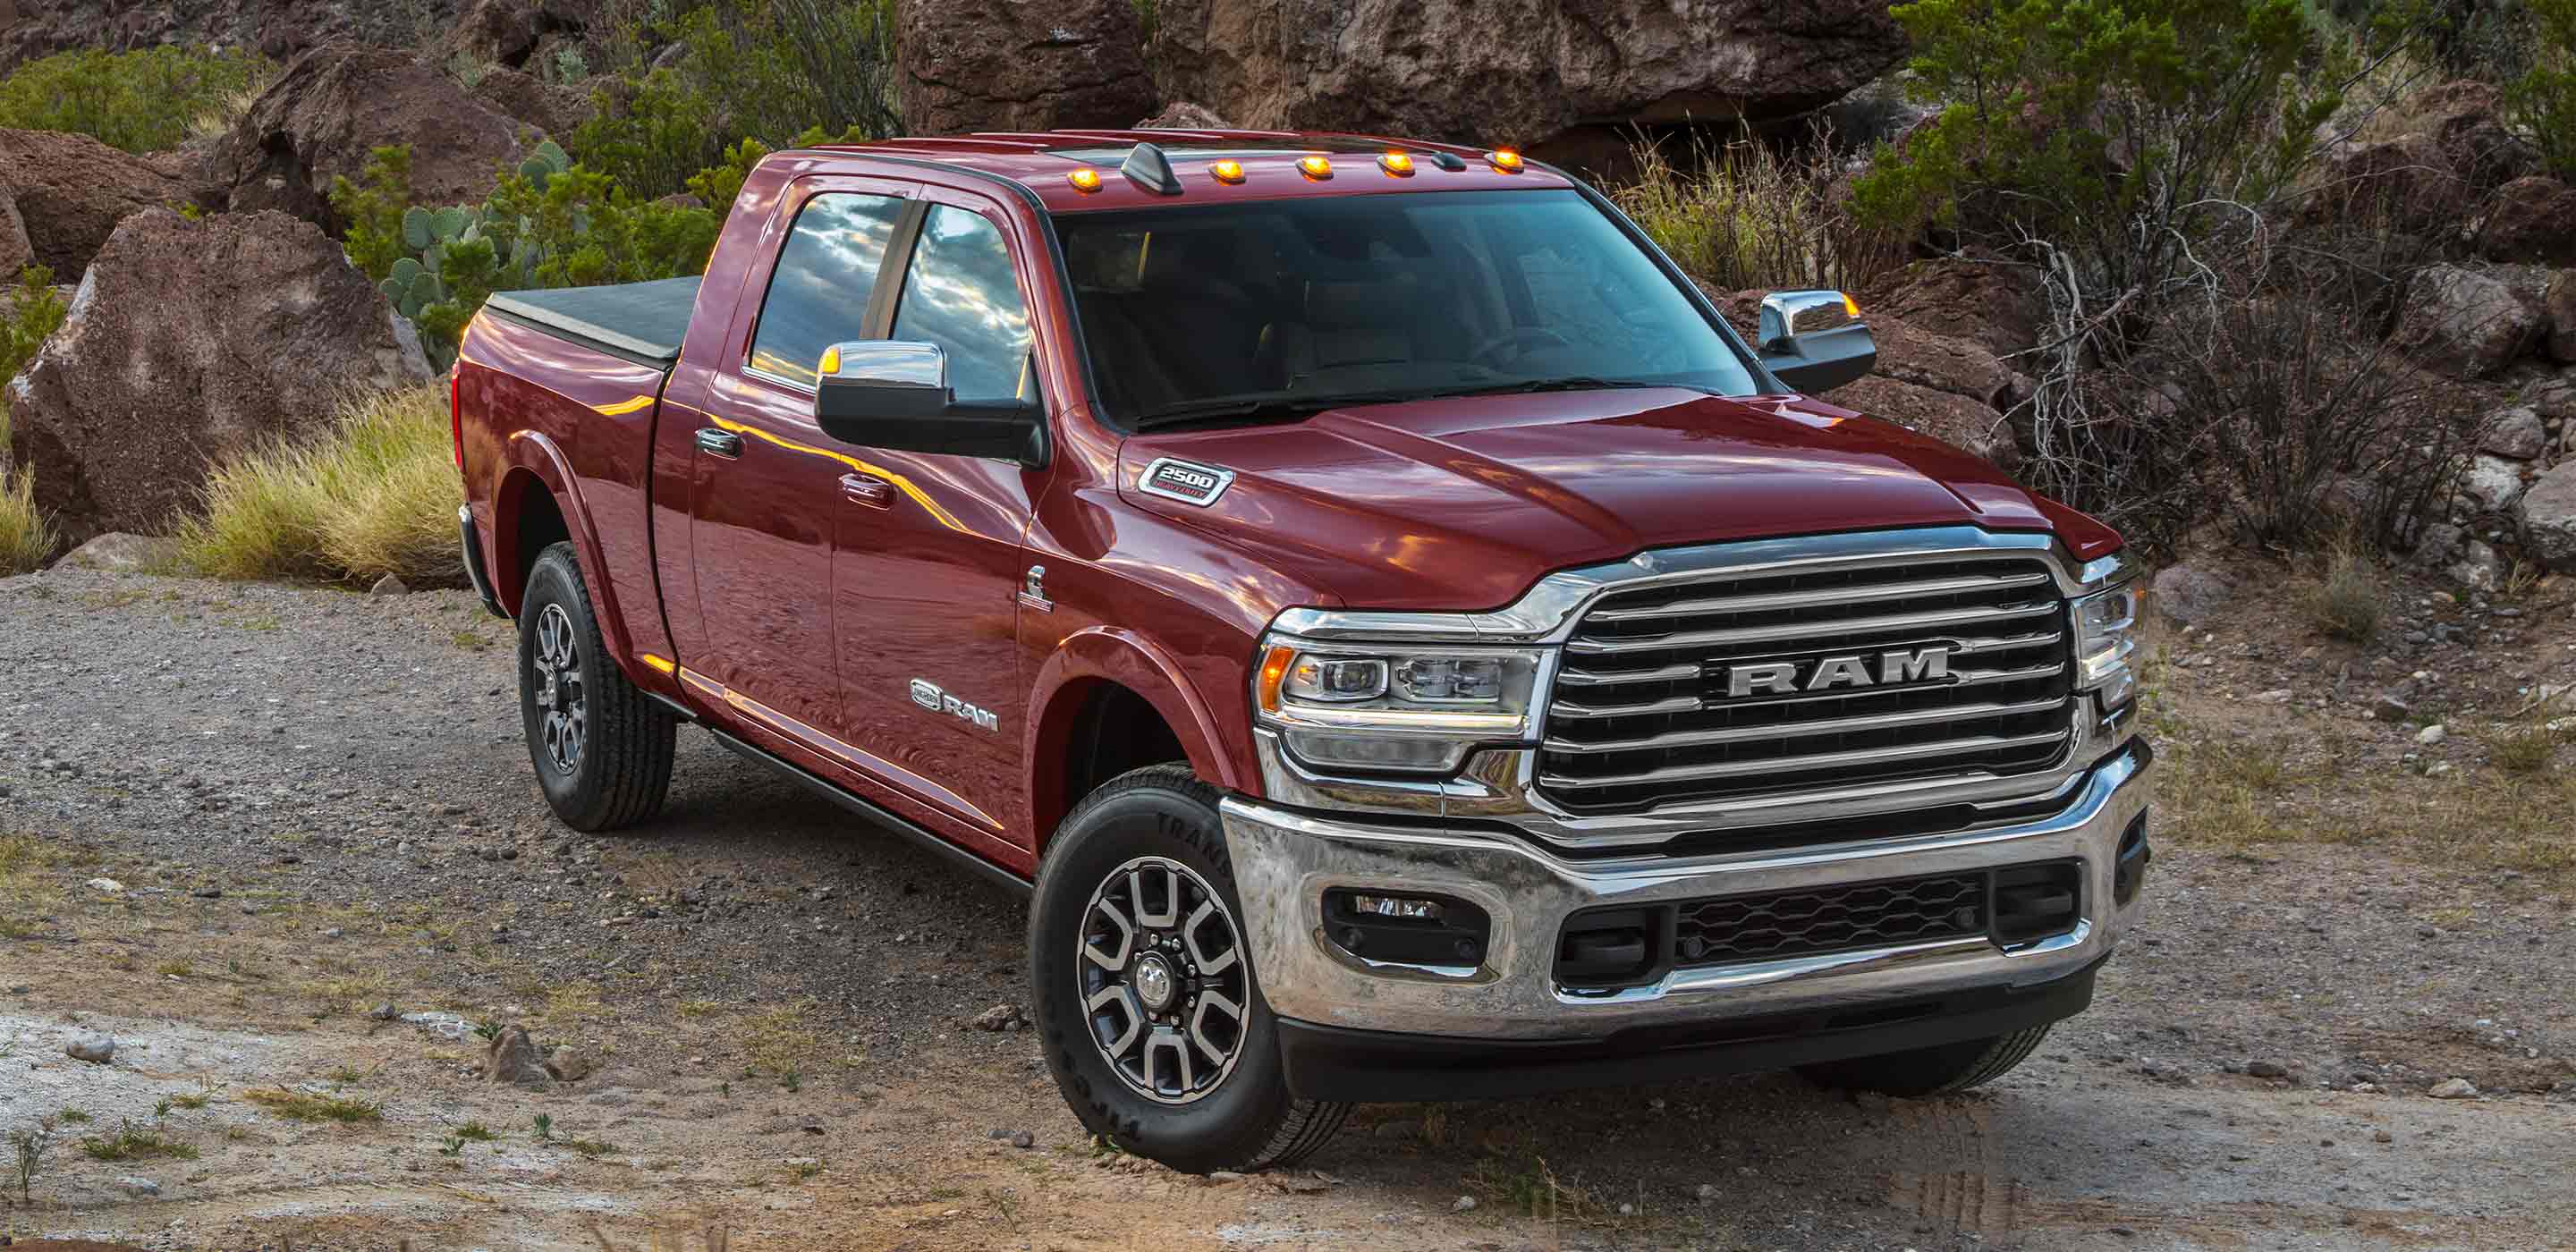 Display The 2022 Ram 2500 being driven on a gravel road.